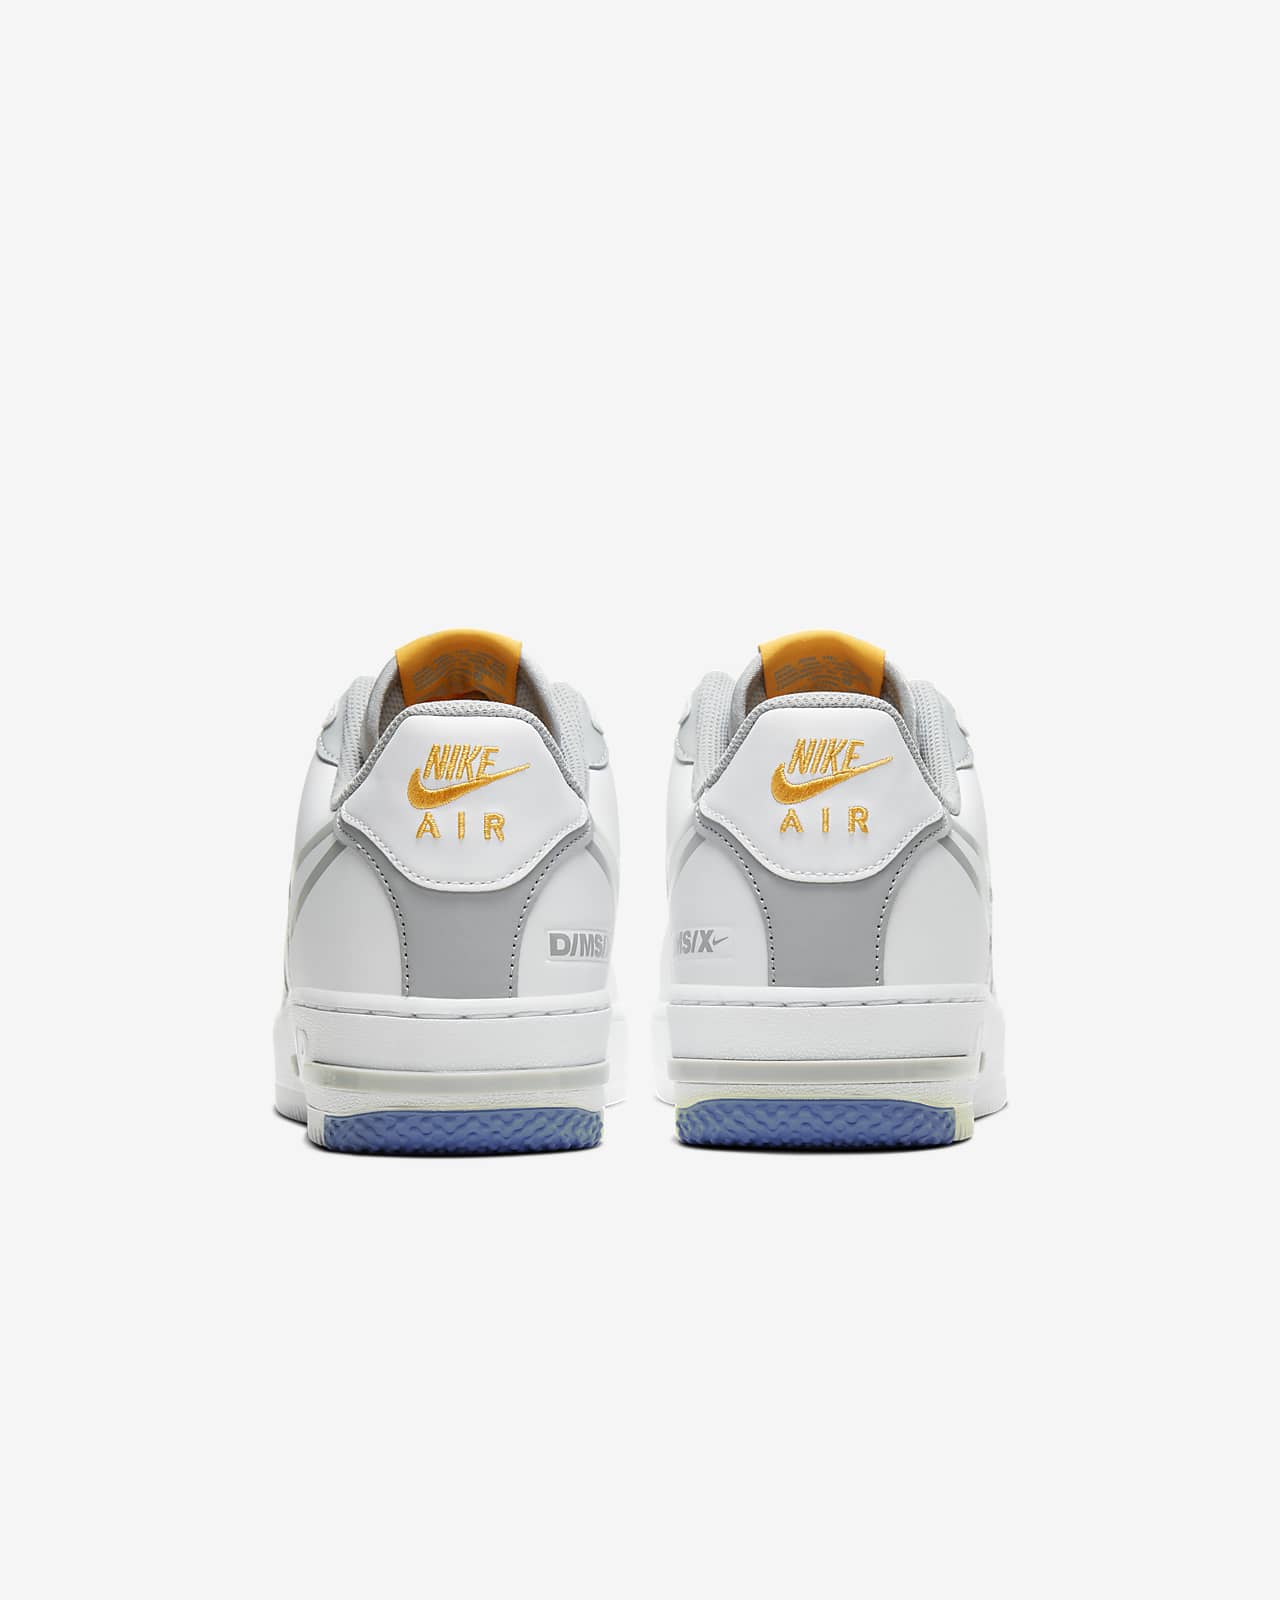 nike air force 1 good for walking